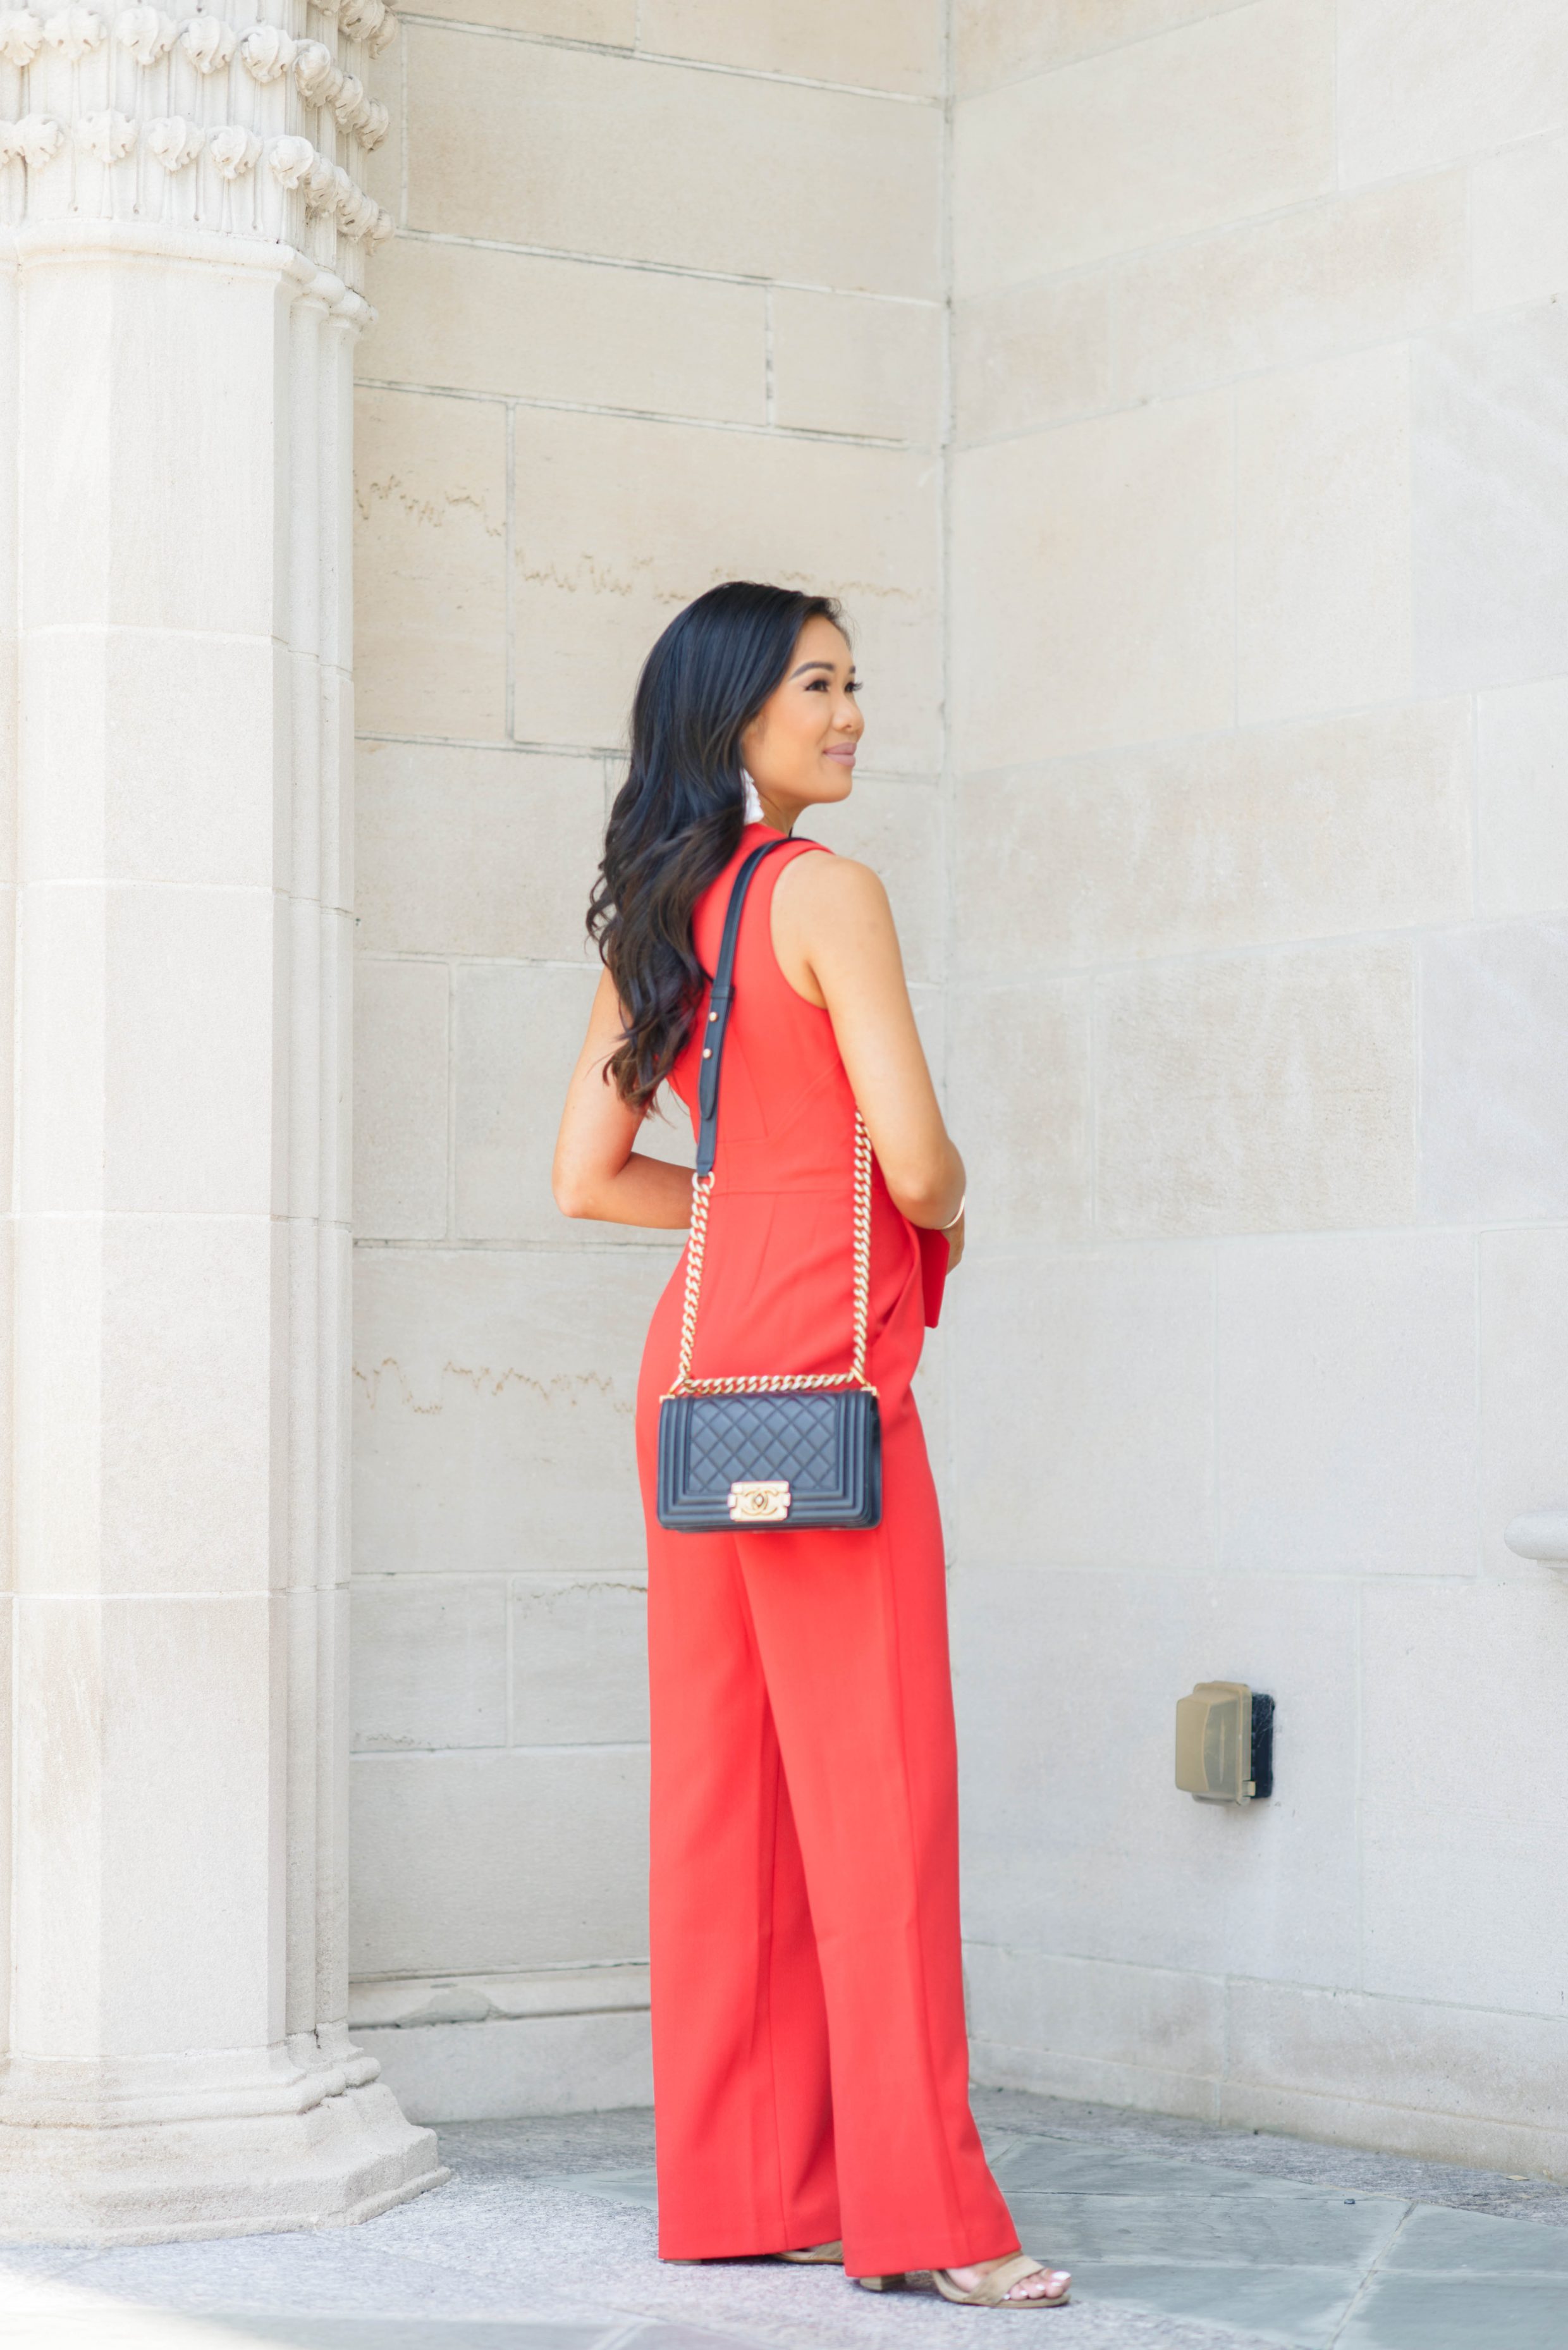 Blogger Hoang-Kim wears a red jumpsuit with pockets